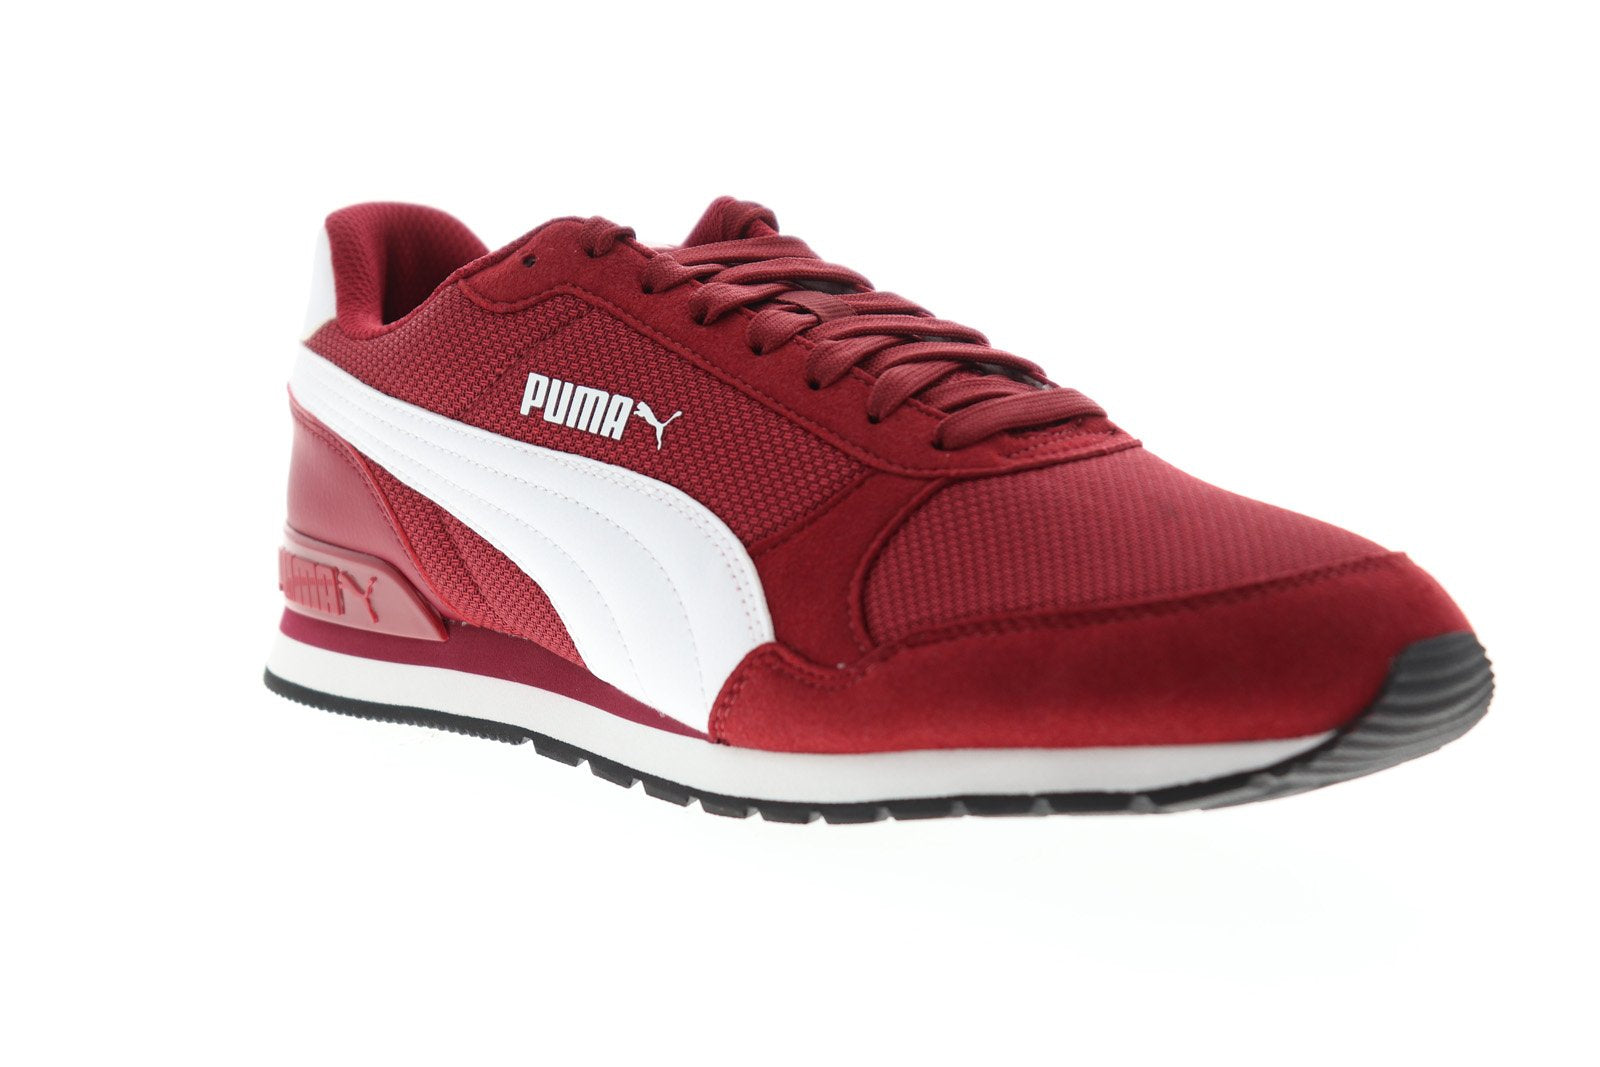 Puma ST Runner V2 Mesh 36681107 Mens Red Suede Low Top Lifestyle Sneak ...